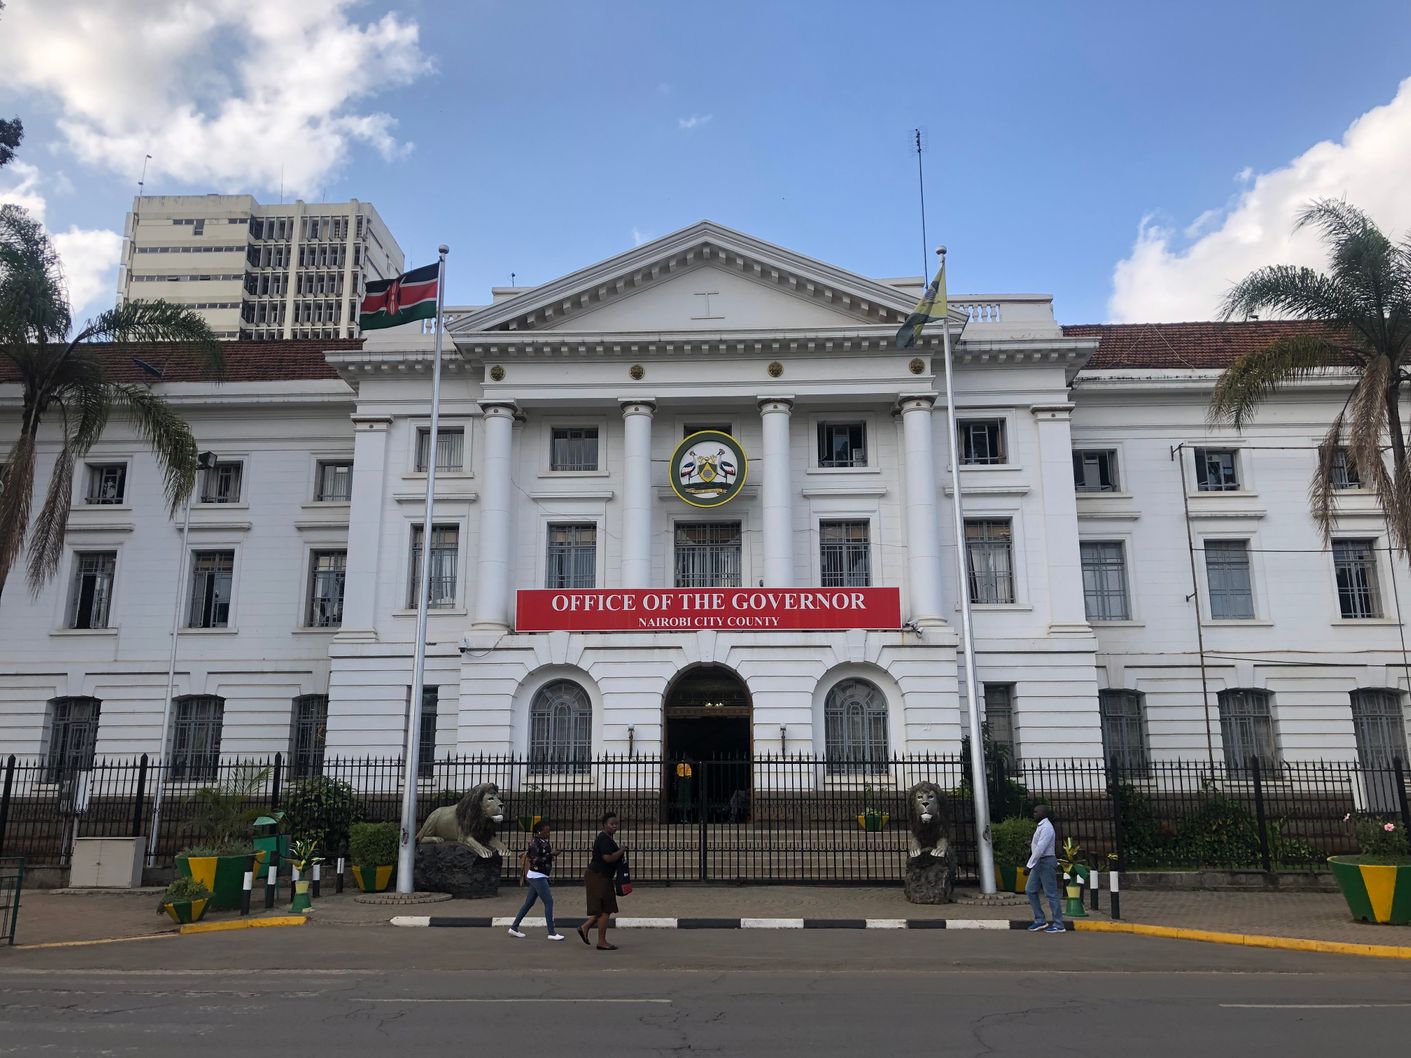 Office of the governon at Nairobi central business district